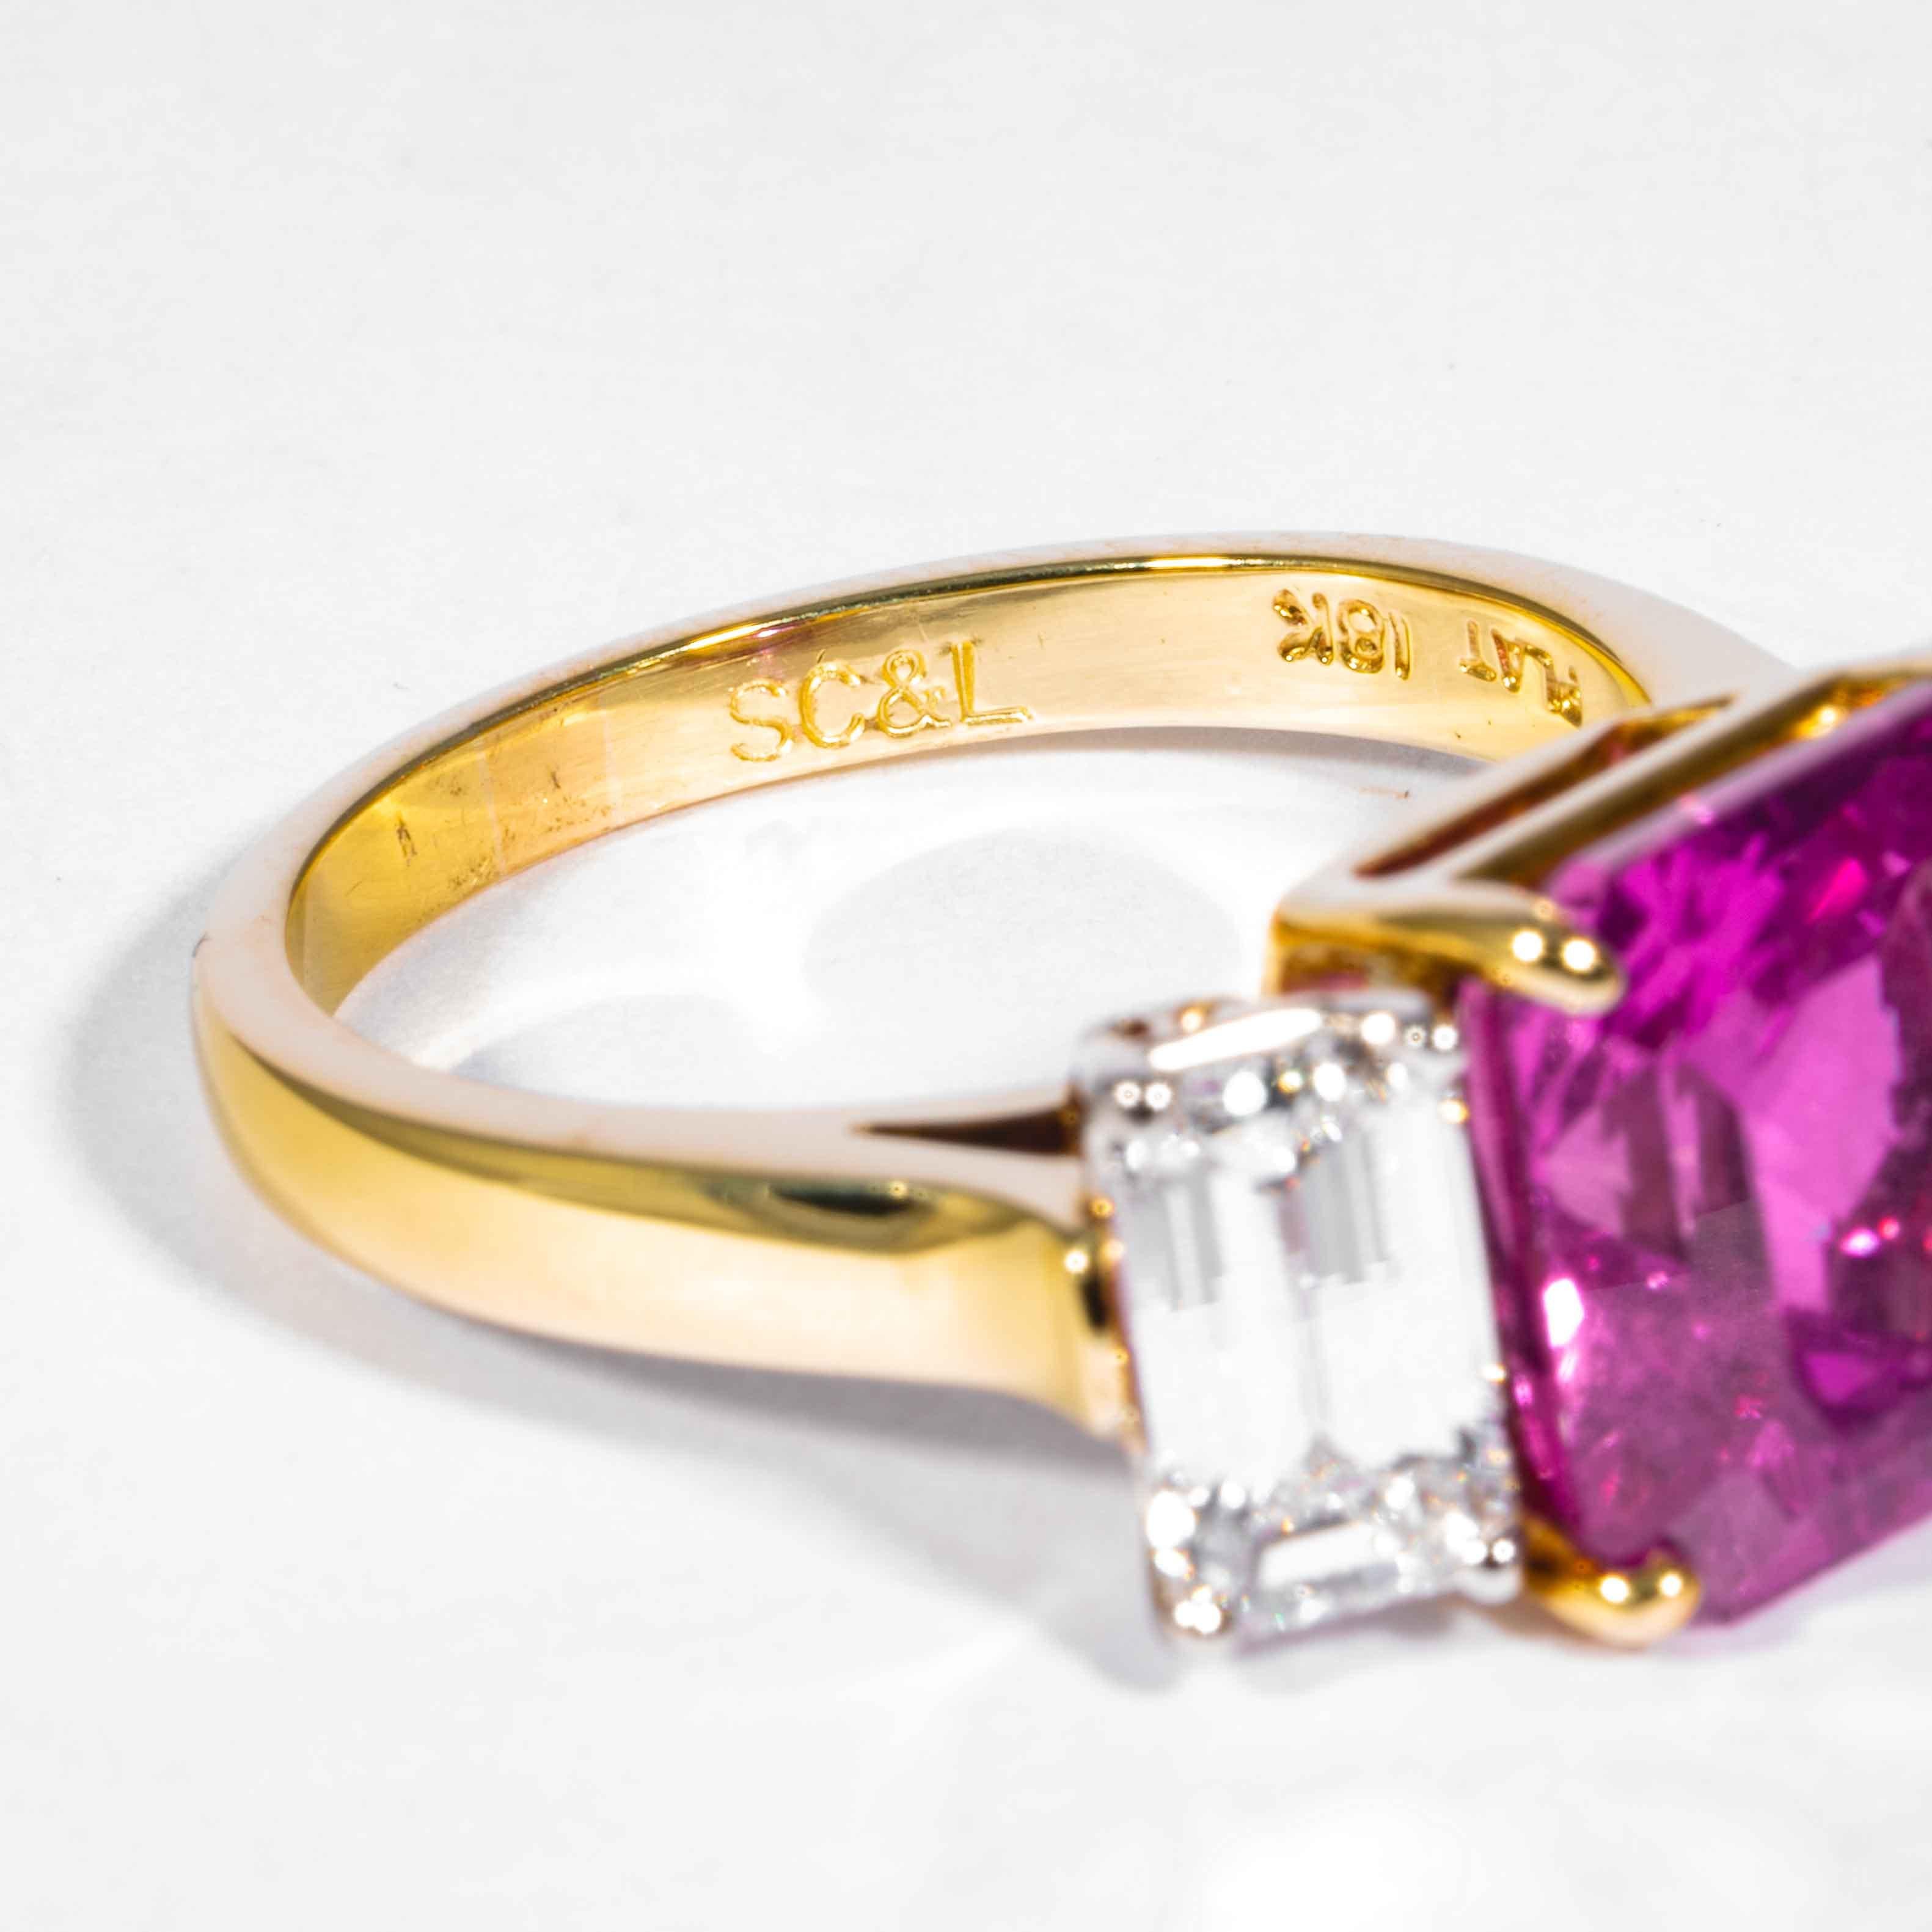 Shreve, Crump & Low 6.13 Carat GIA Certified Pink Sapphire and Diamond Ring 2